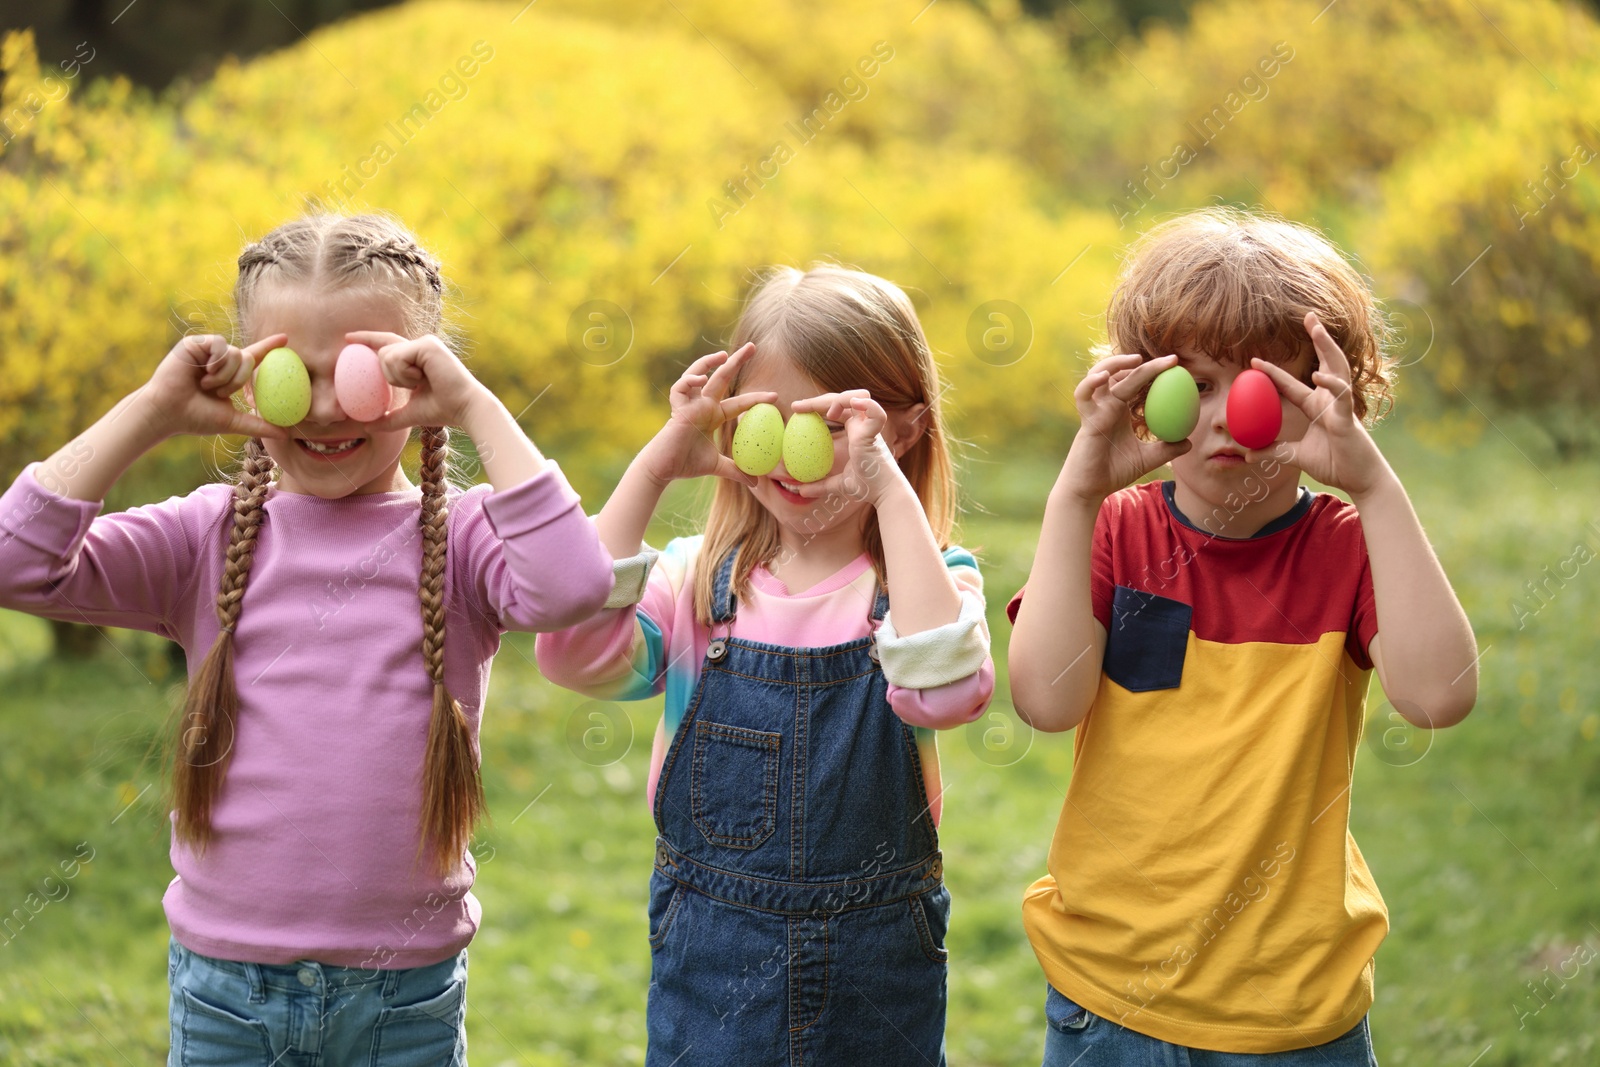 Photo of Easter celebration. Little children covering eyes with painted eggs outdoors